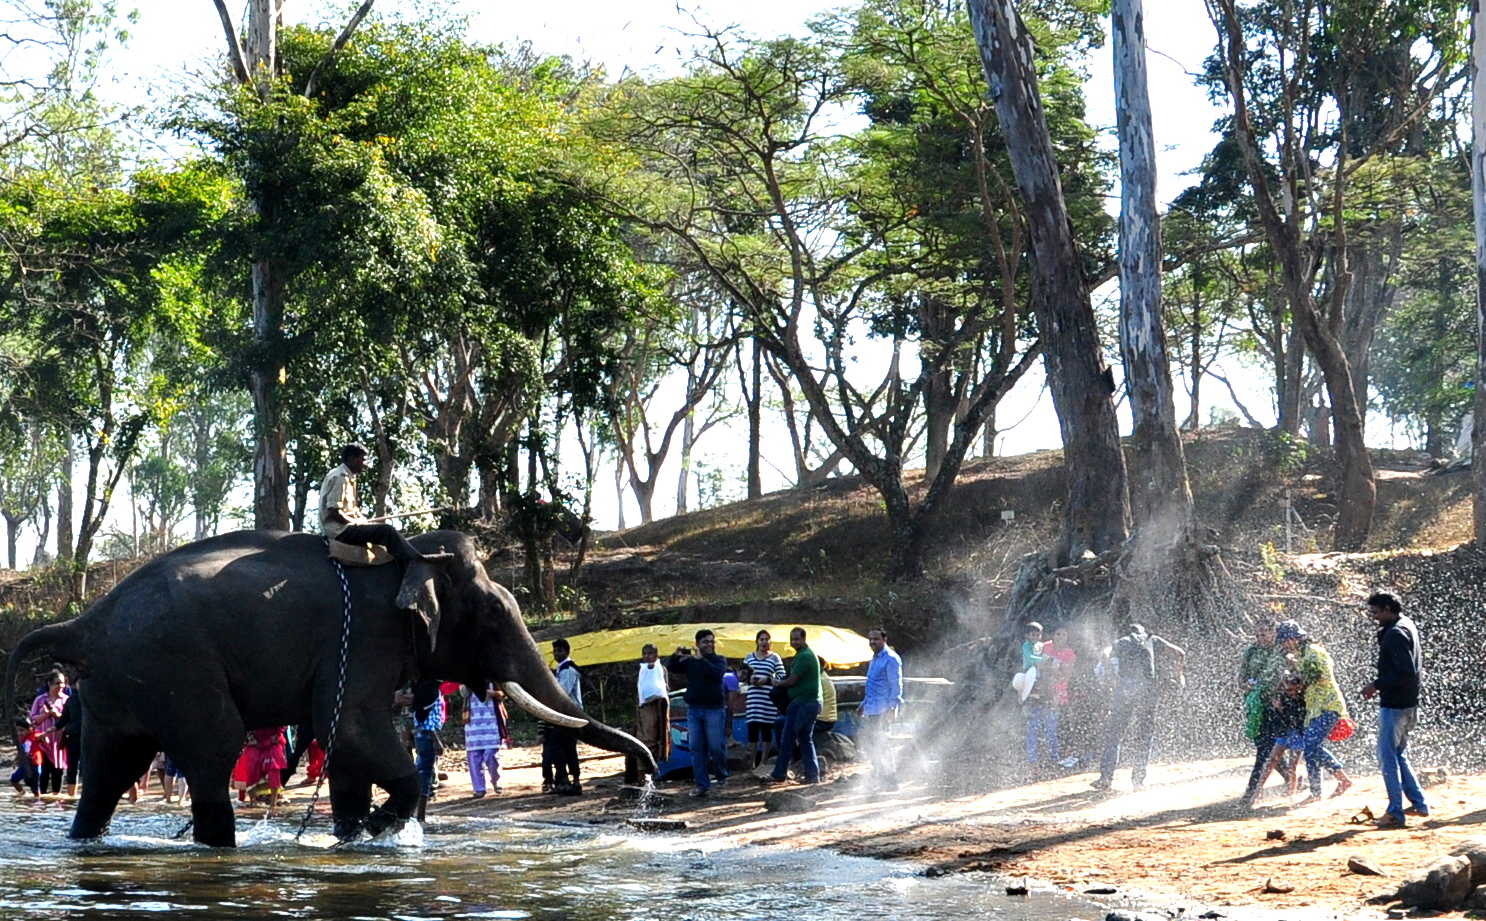 This elephant is chained, but still is playful enough to spray water on unsuspecting tourists. image source: Dipankar Paul/Folomojo